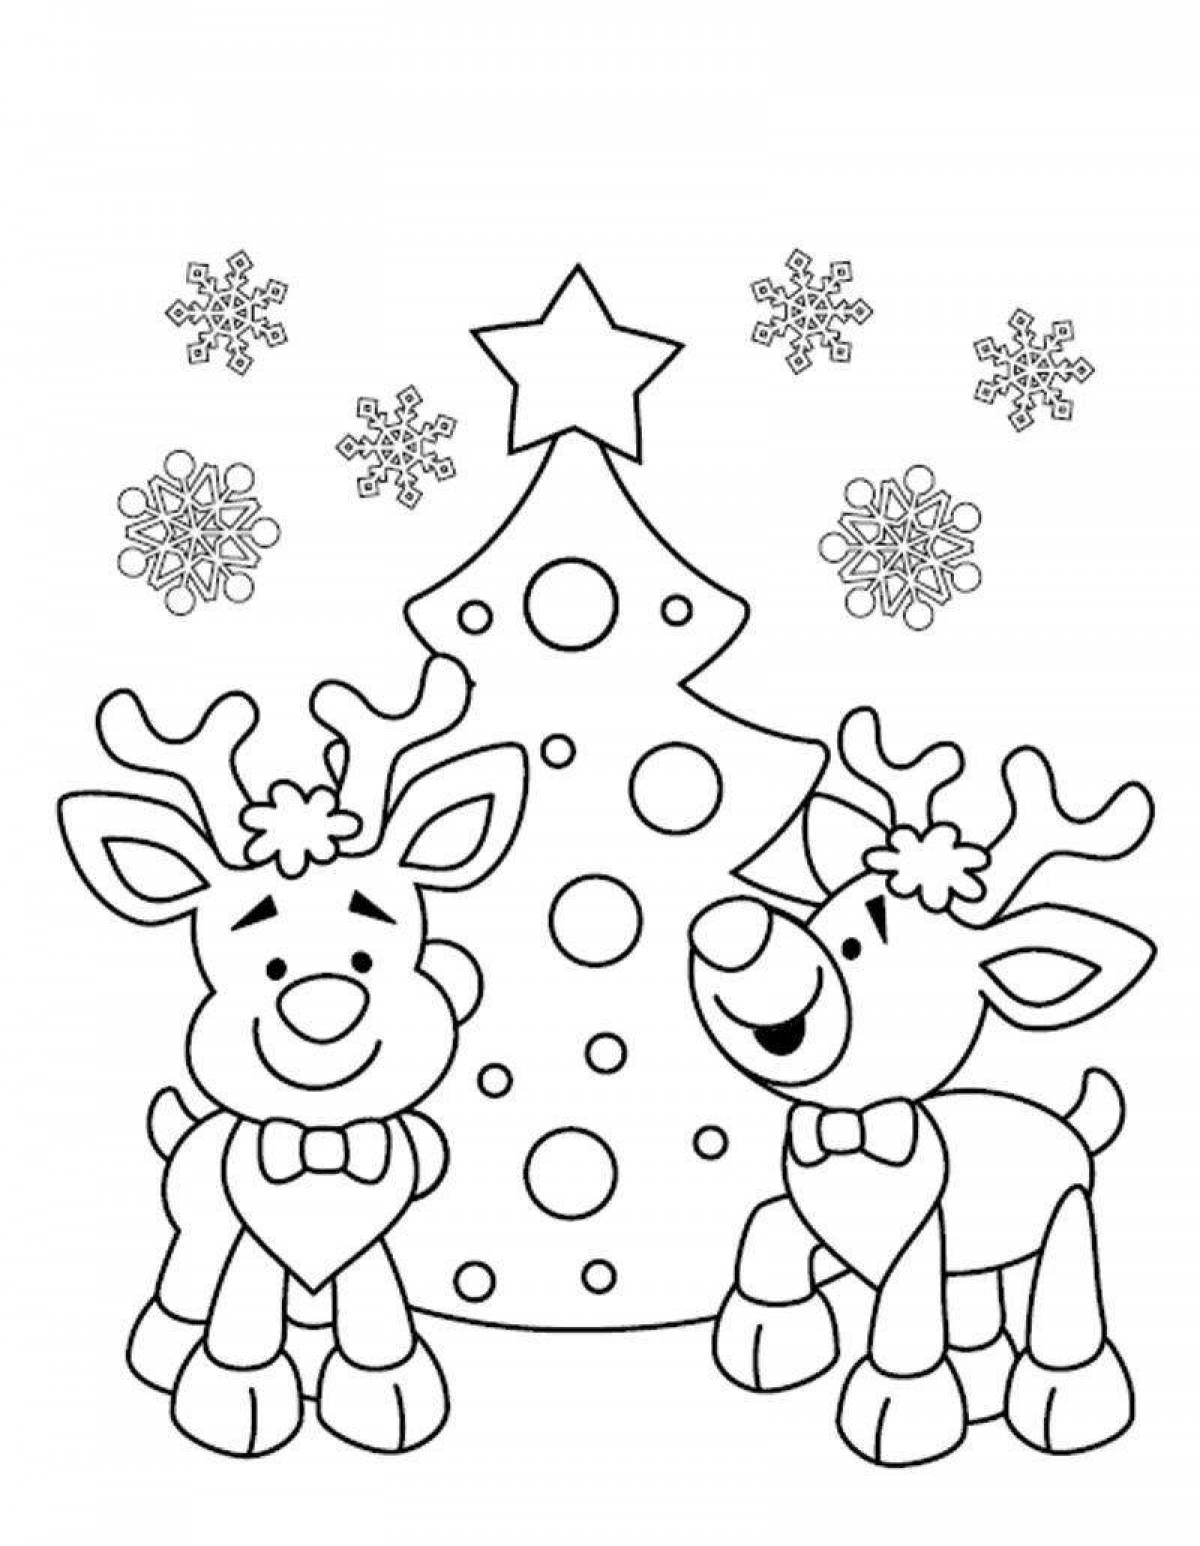 Exciting Christmas coloring book for preschoolers